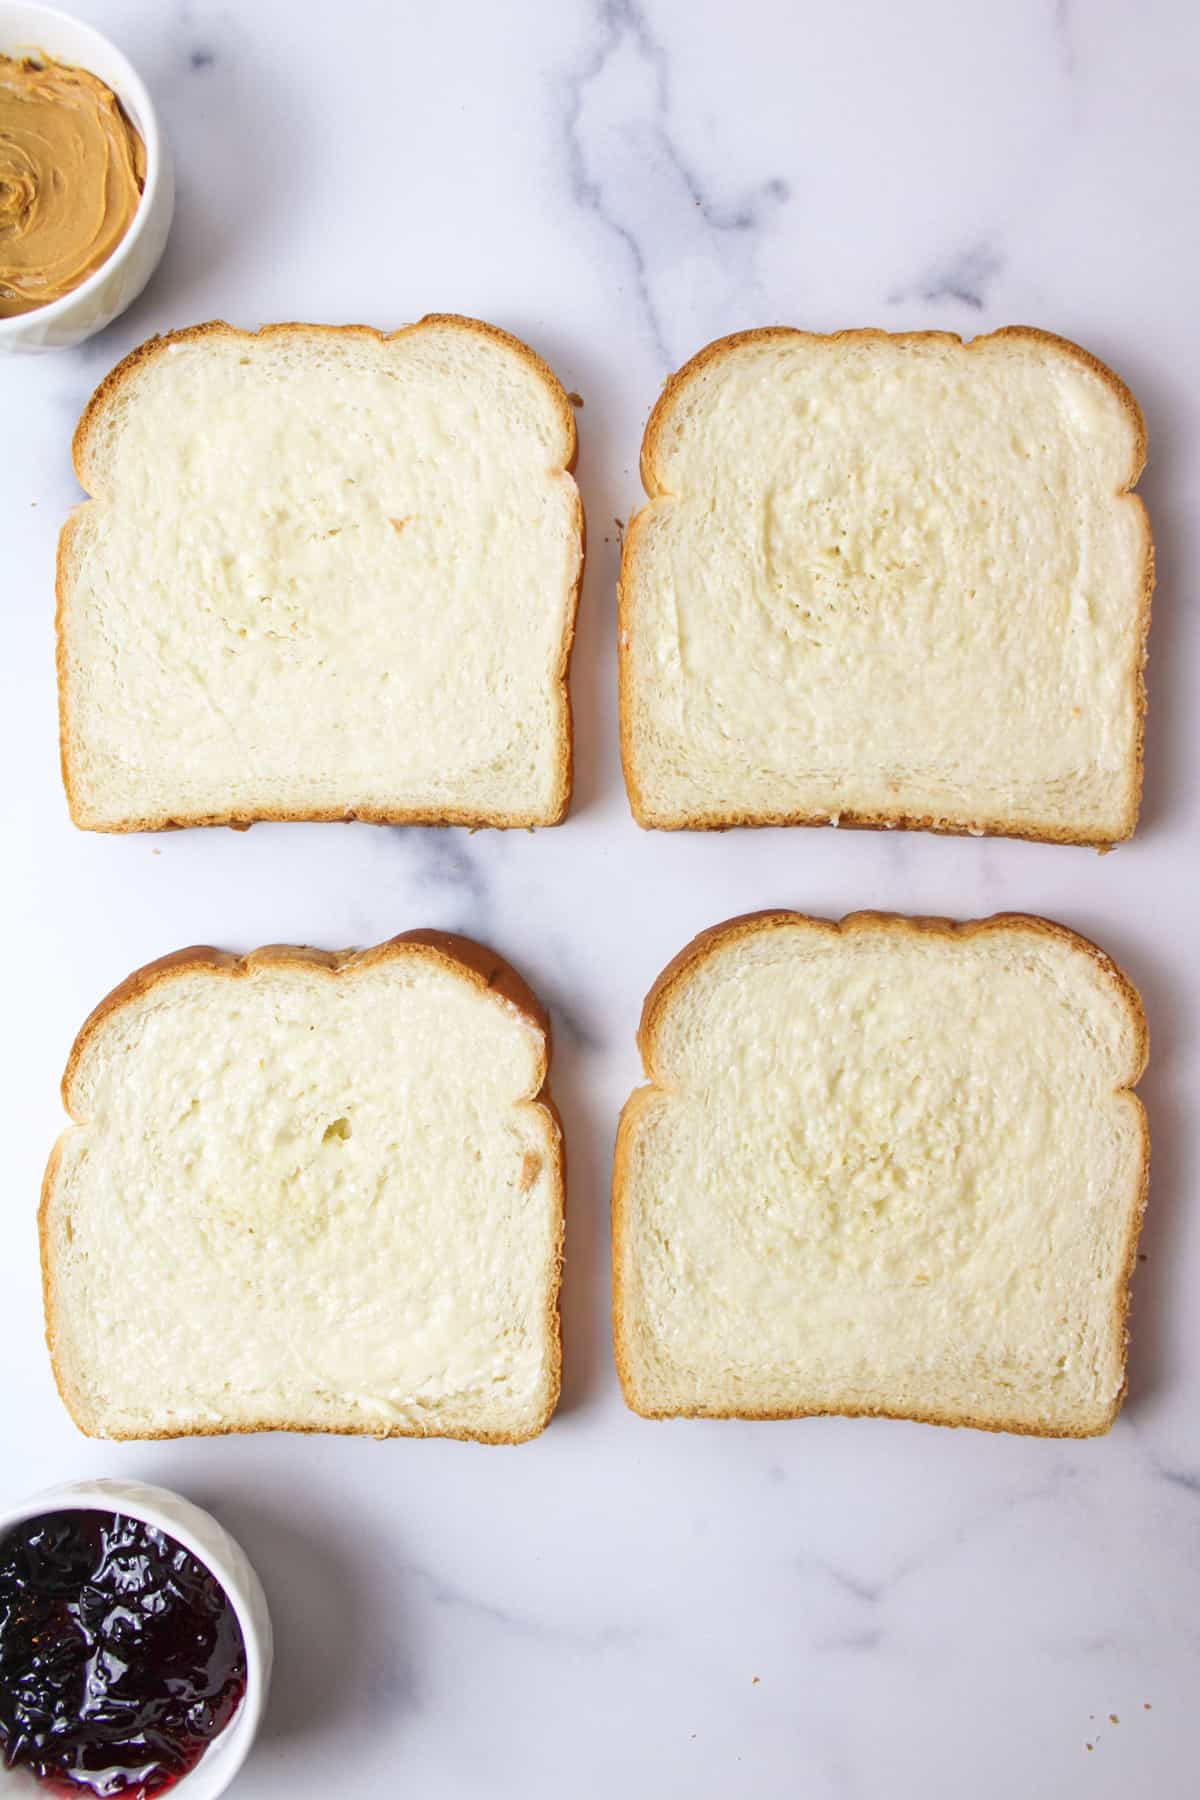 buttered bread slices.